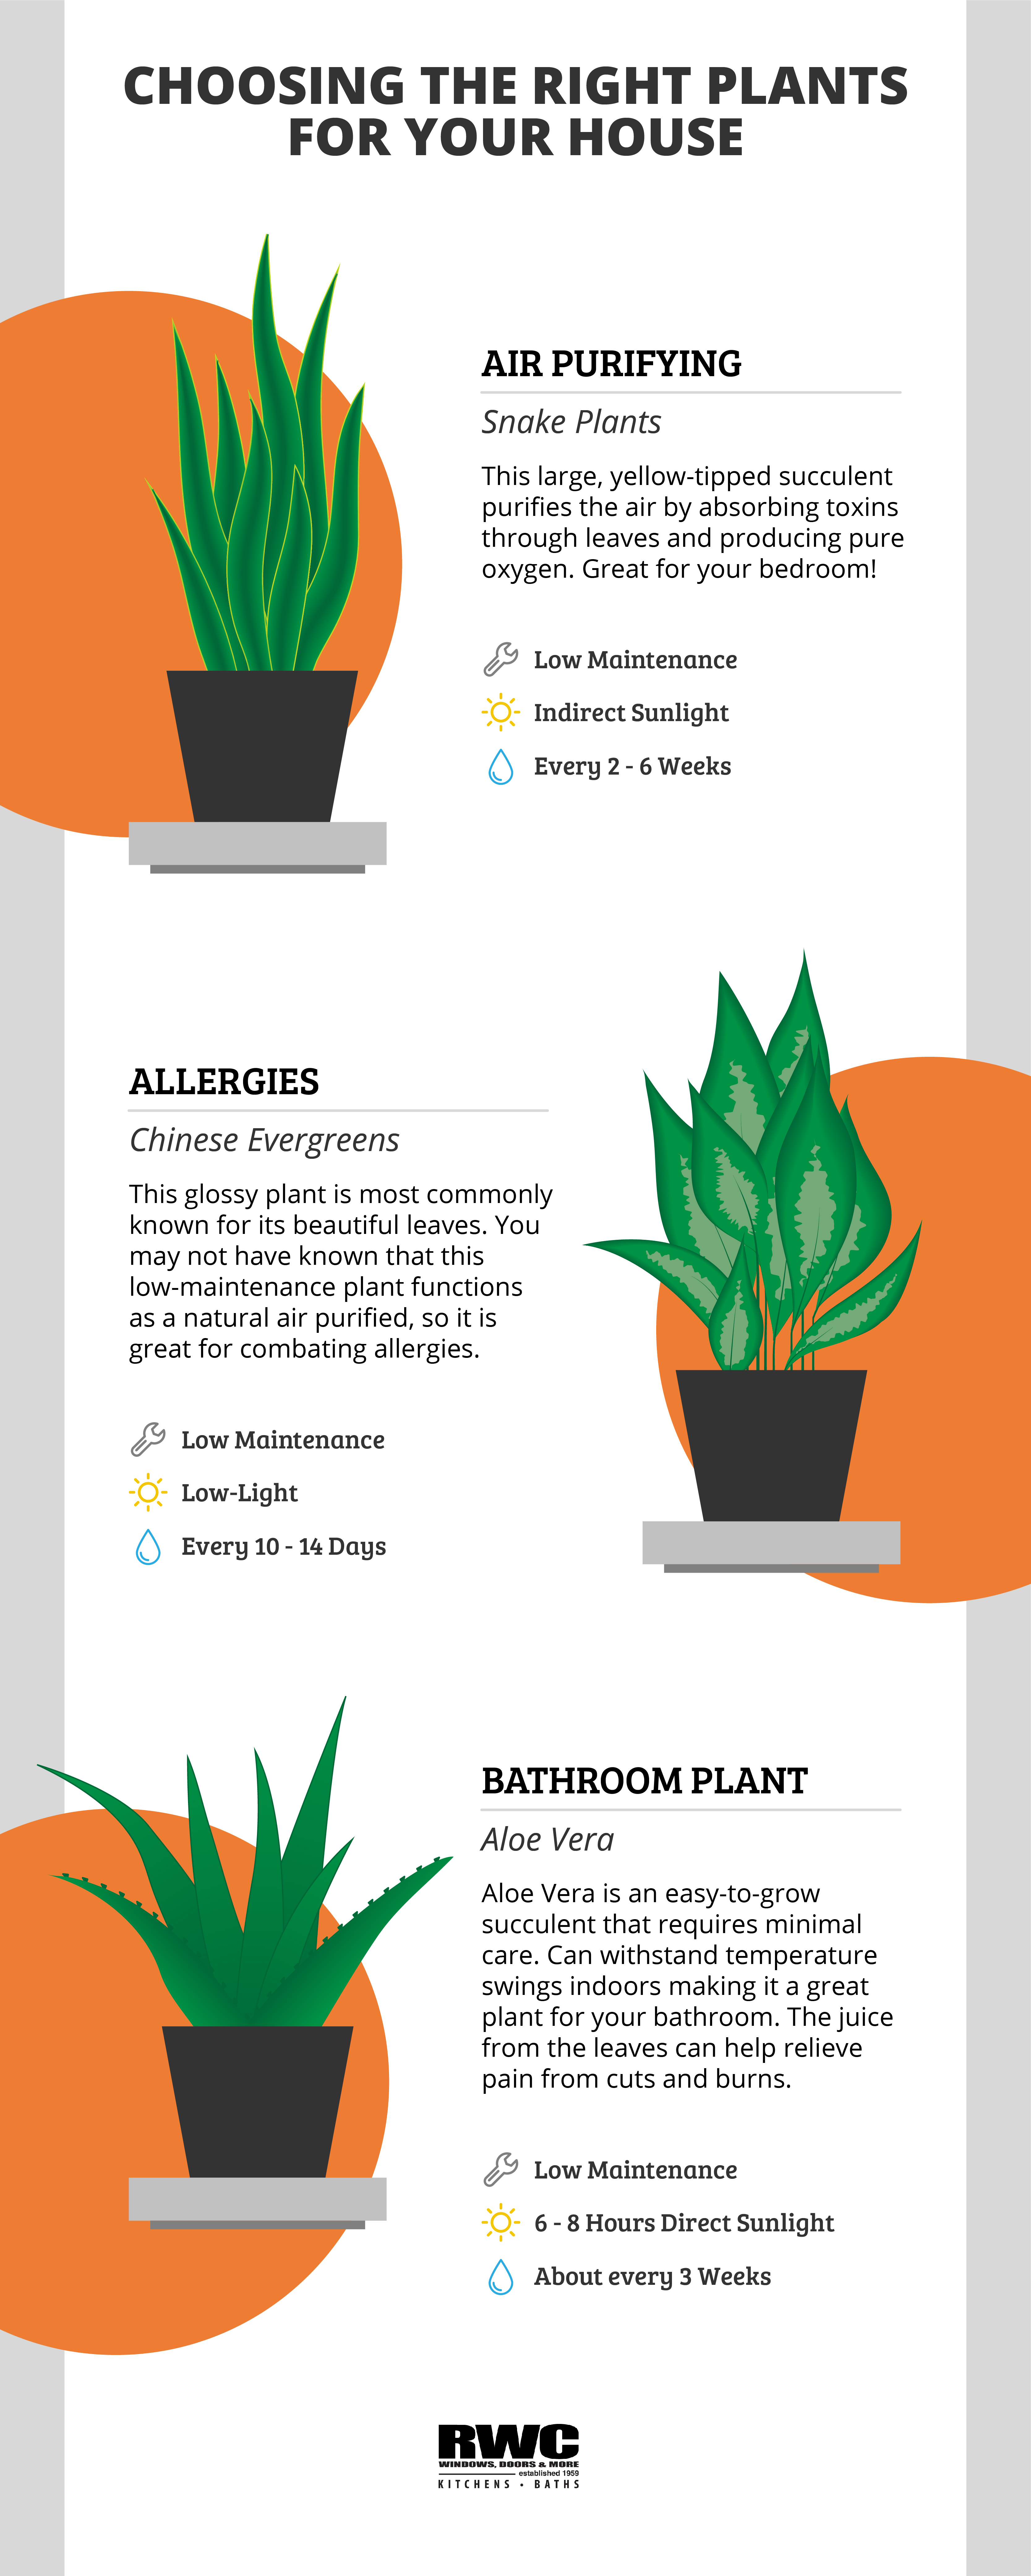 Best air purifying indoor plants, best indoor plants for allergies, house plant organization, benefits of plants in bathrooms, bathroom plant ideas